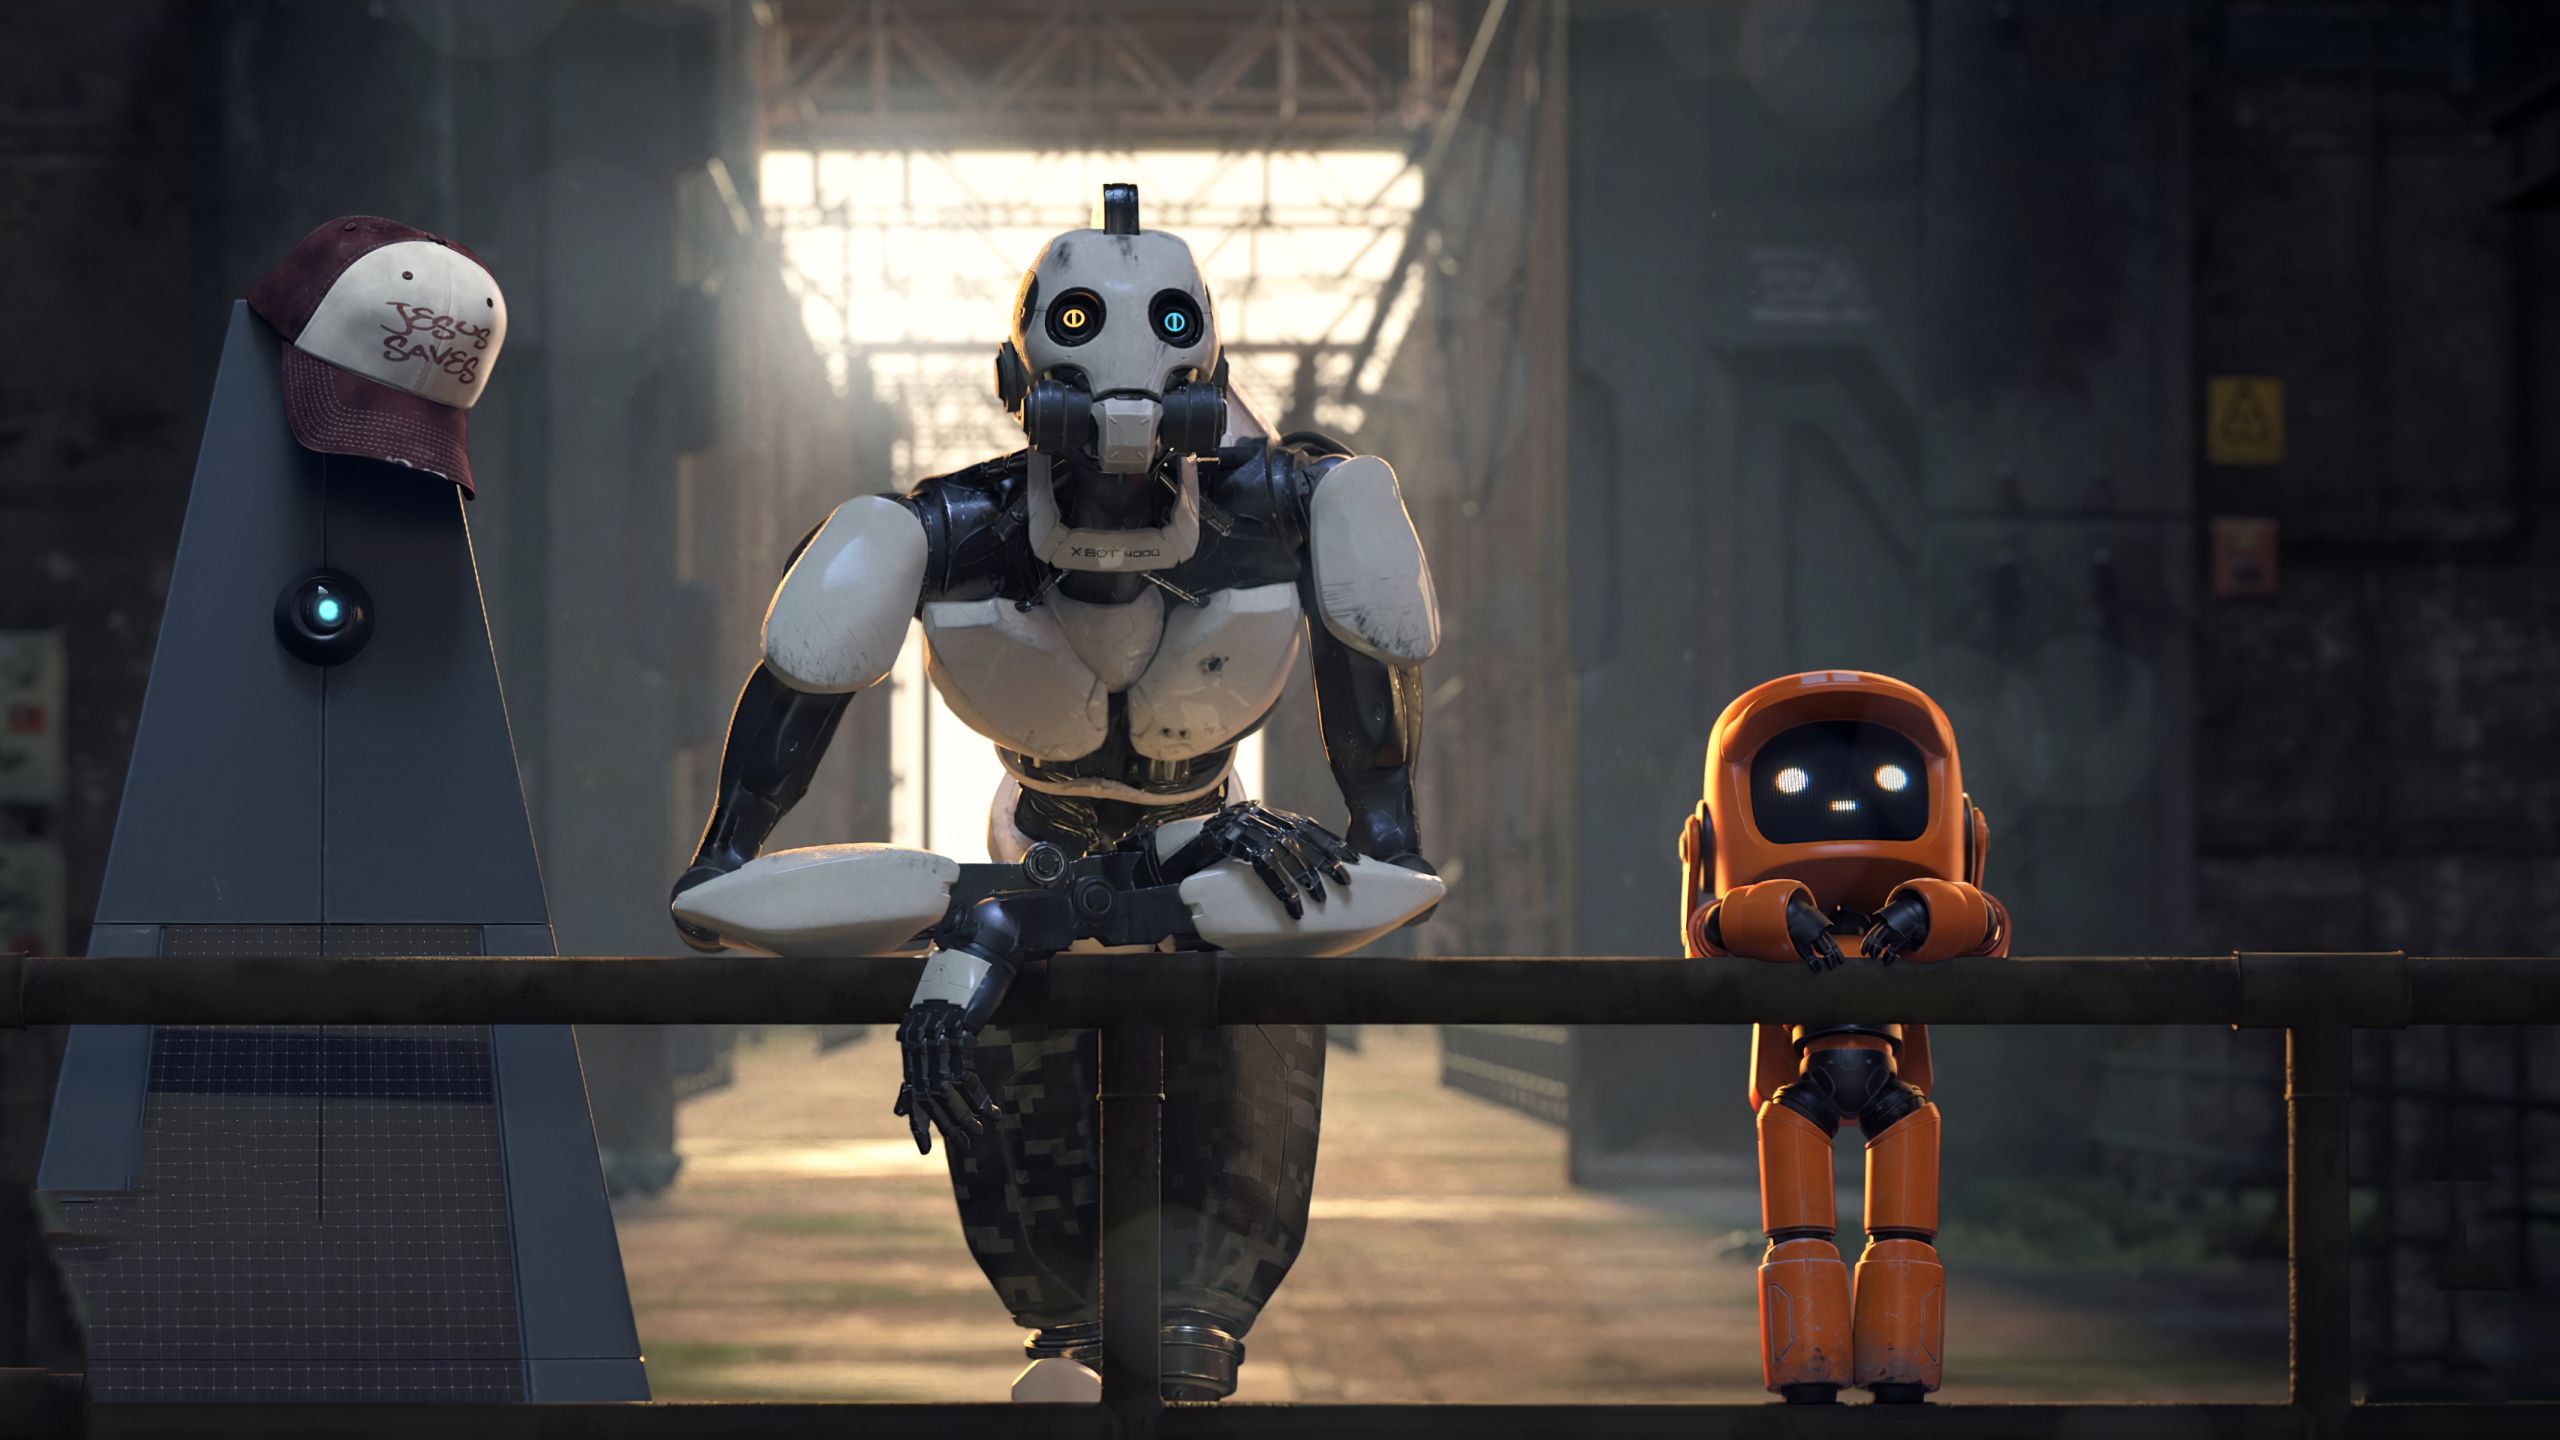 Love Death And Robots 1440P Resolution Wallpaper, HD TV Series 4K Wallpaper, Image, Photo and Background